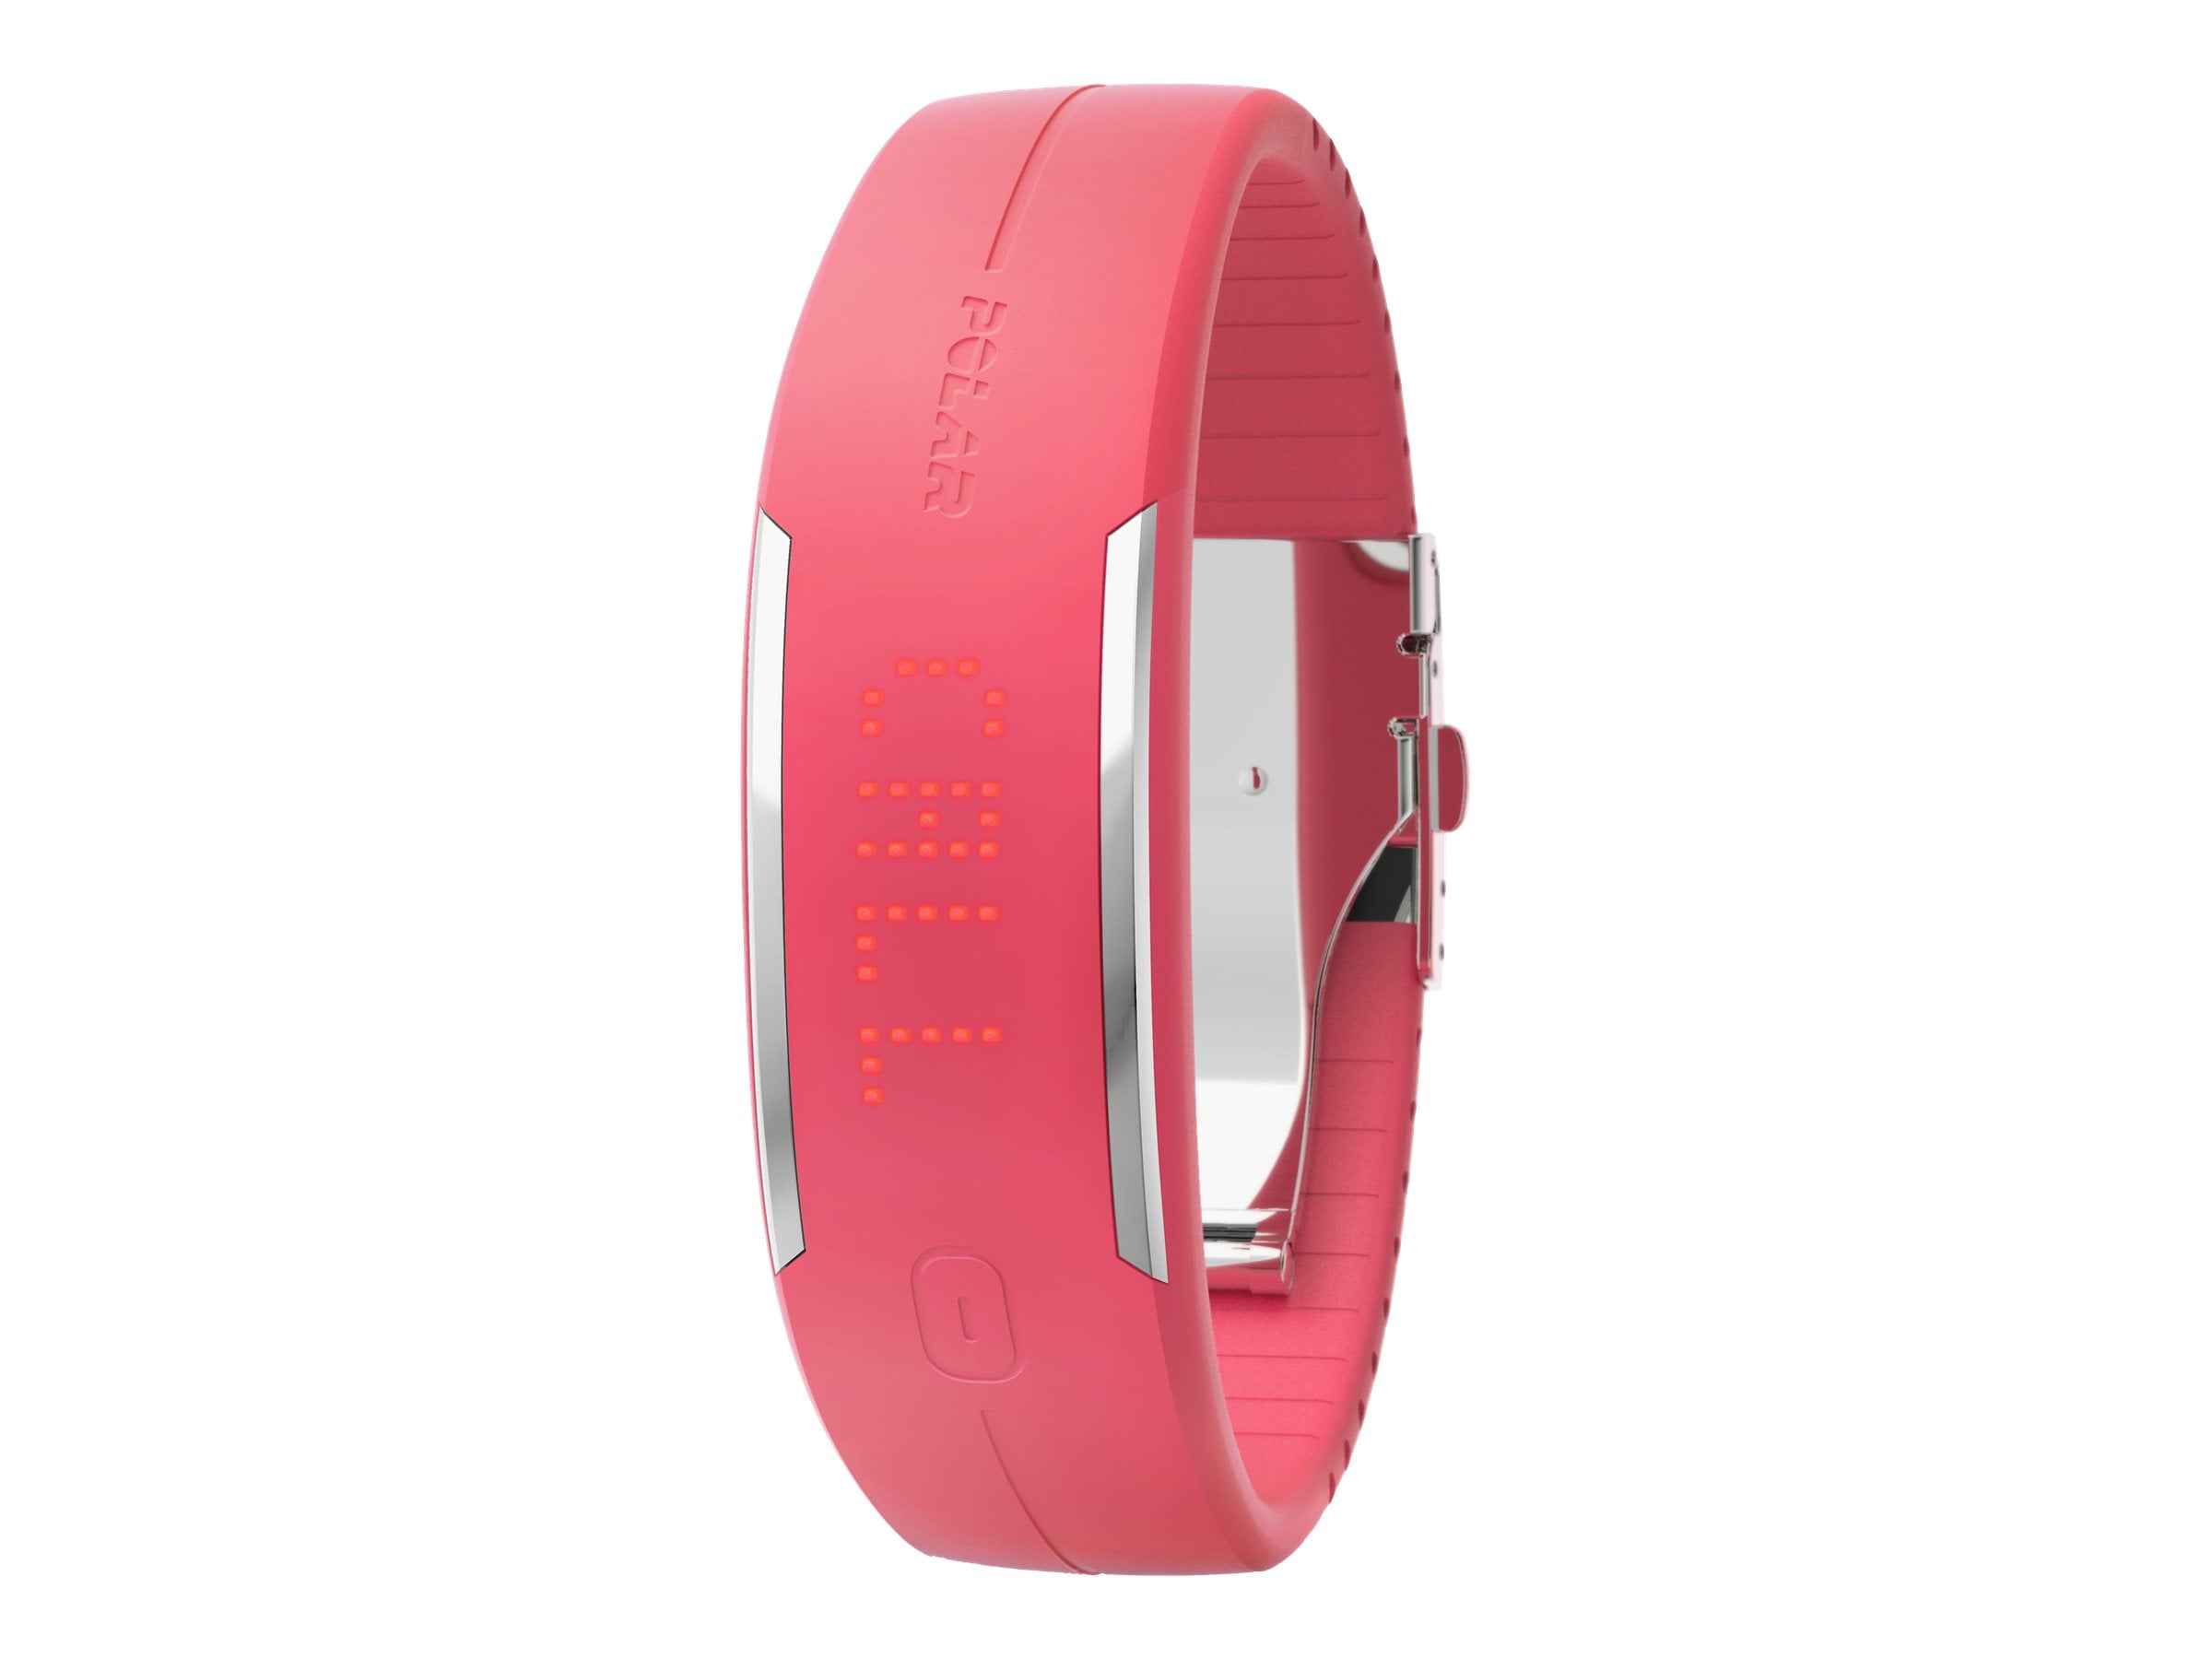 Loop 2 - Activity tracker with band - TPU - wrist size: 5.71 in - 9.45 - monochrome - 4 MB - Bluetooth - 1.34 oz - sorbet pink - Walmart.com